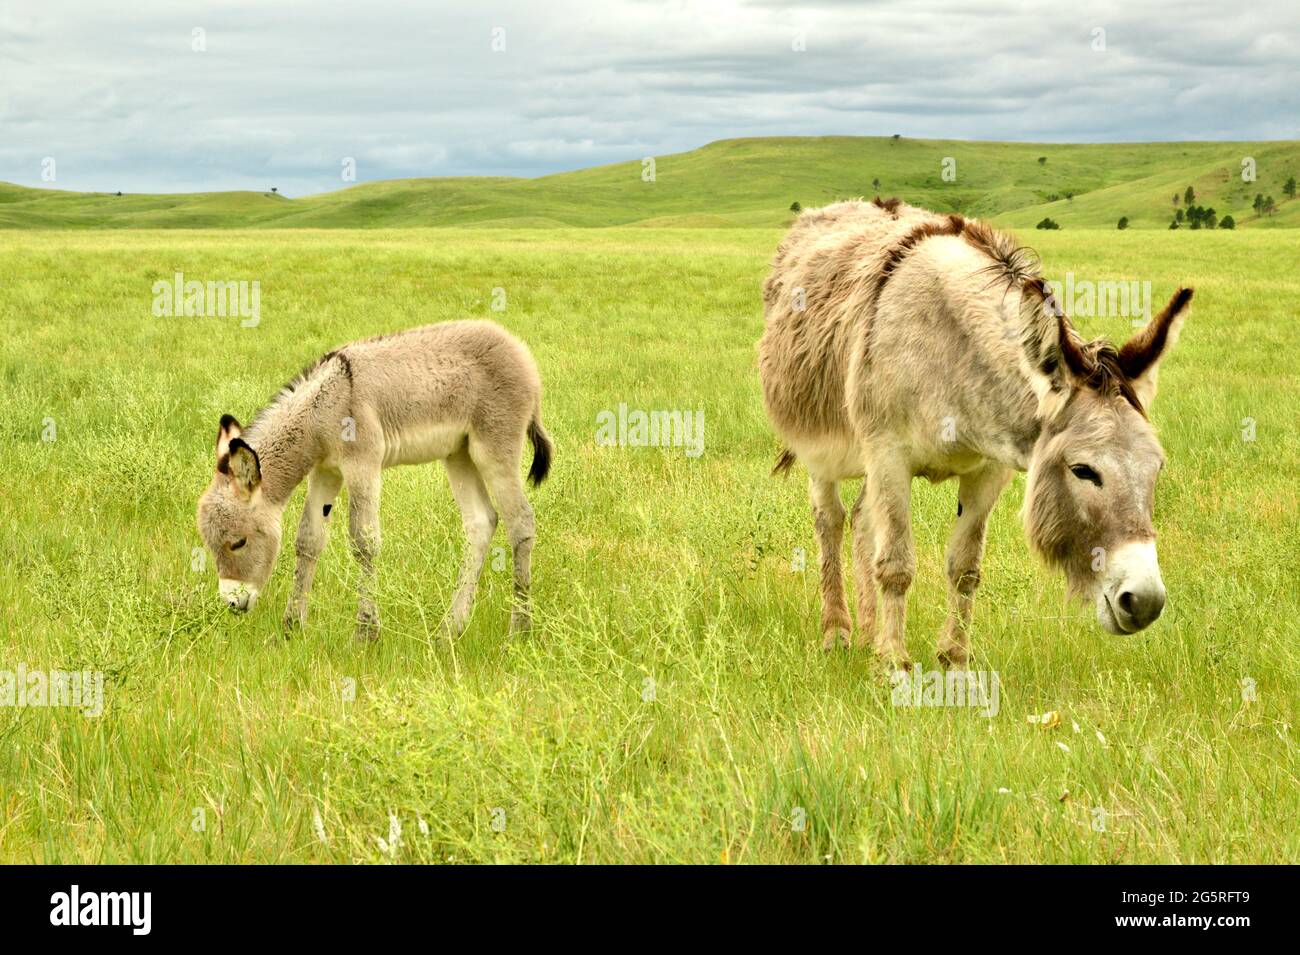 Small Donkeys, or Begging Burros of Custer State Park on the Wildlife Loop Drive through the grasslands. Animal Viewing in Custer, South Dakota, USA Stock Photo